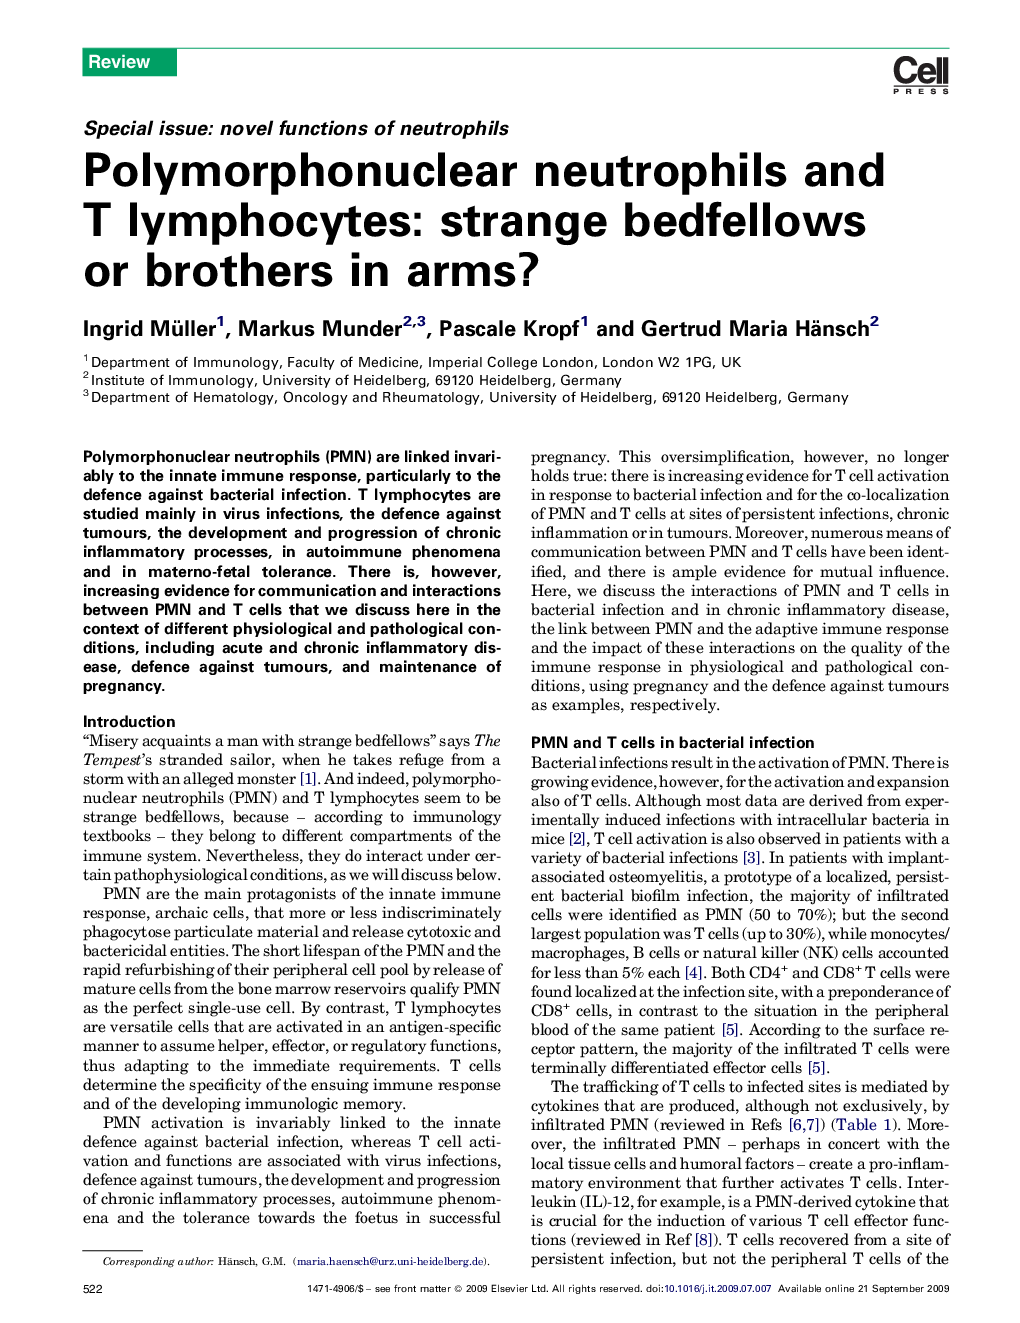 Polymorphonuclear neutrophils and T lymphocytes: strange bedfellows or brothers in arms?